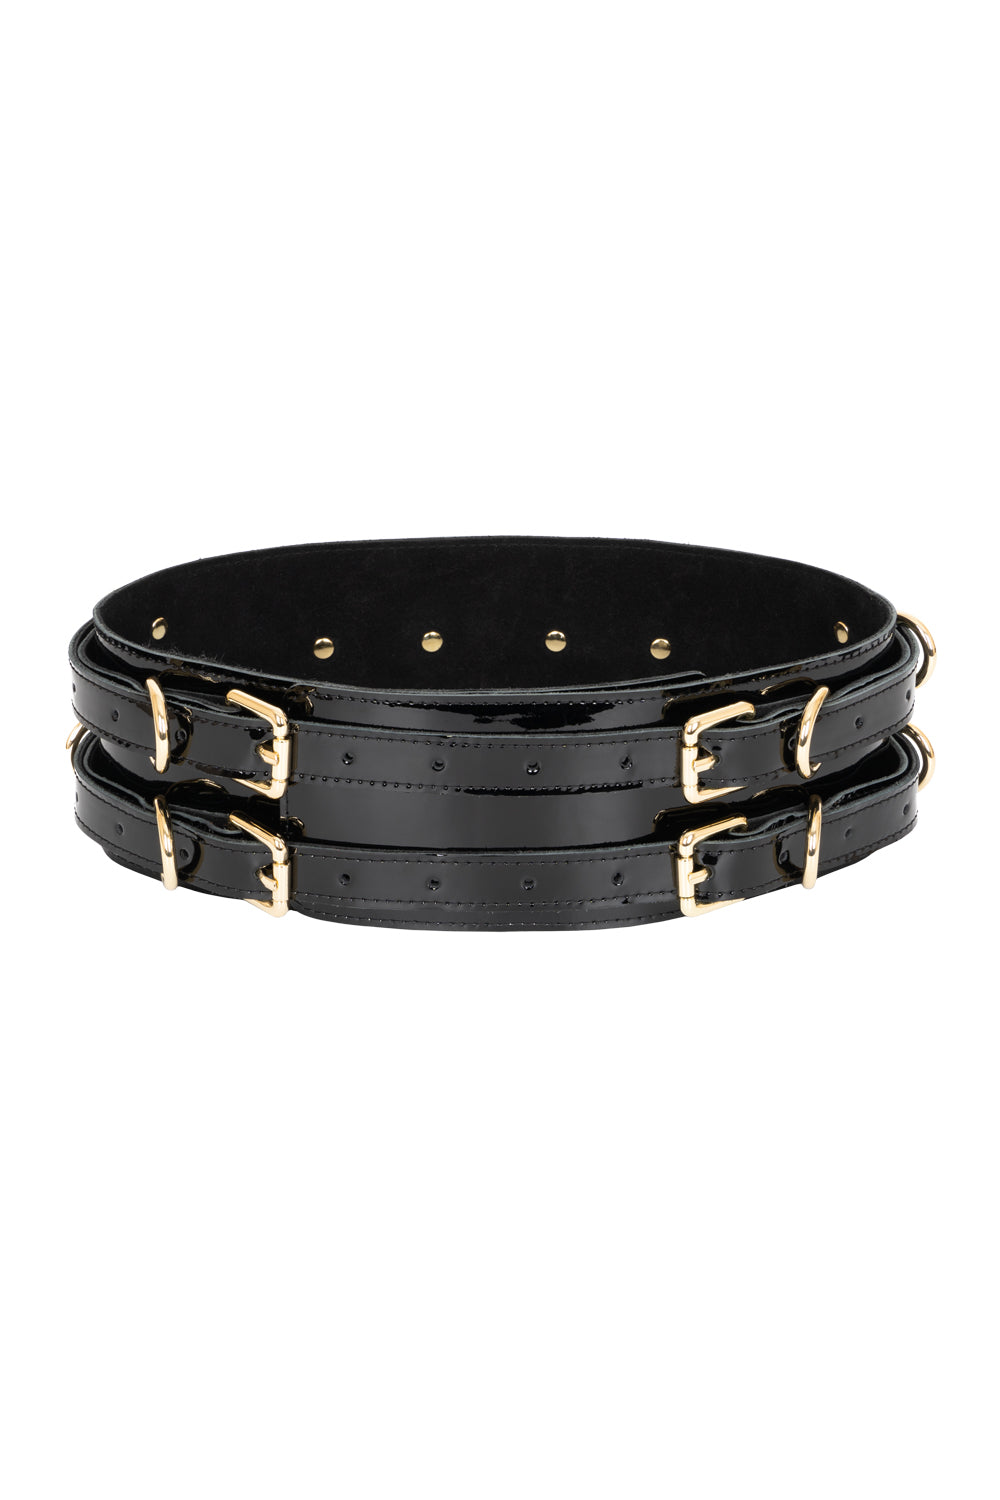 Lacquered Leather Waist Belt. Black